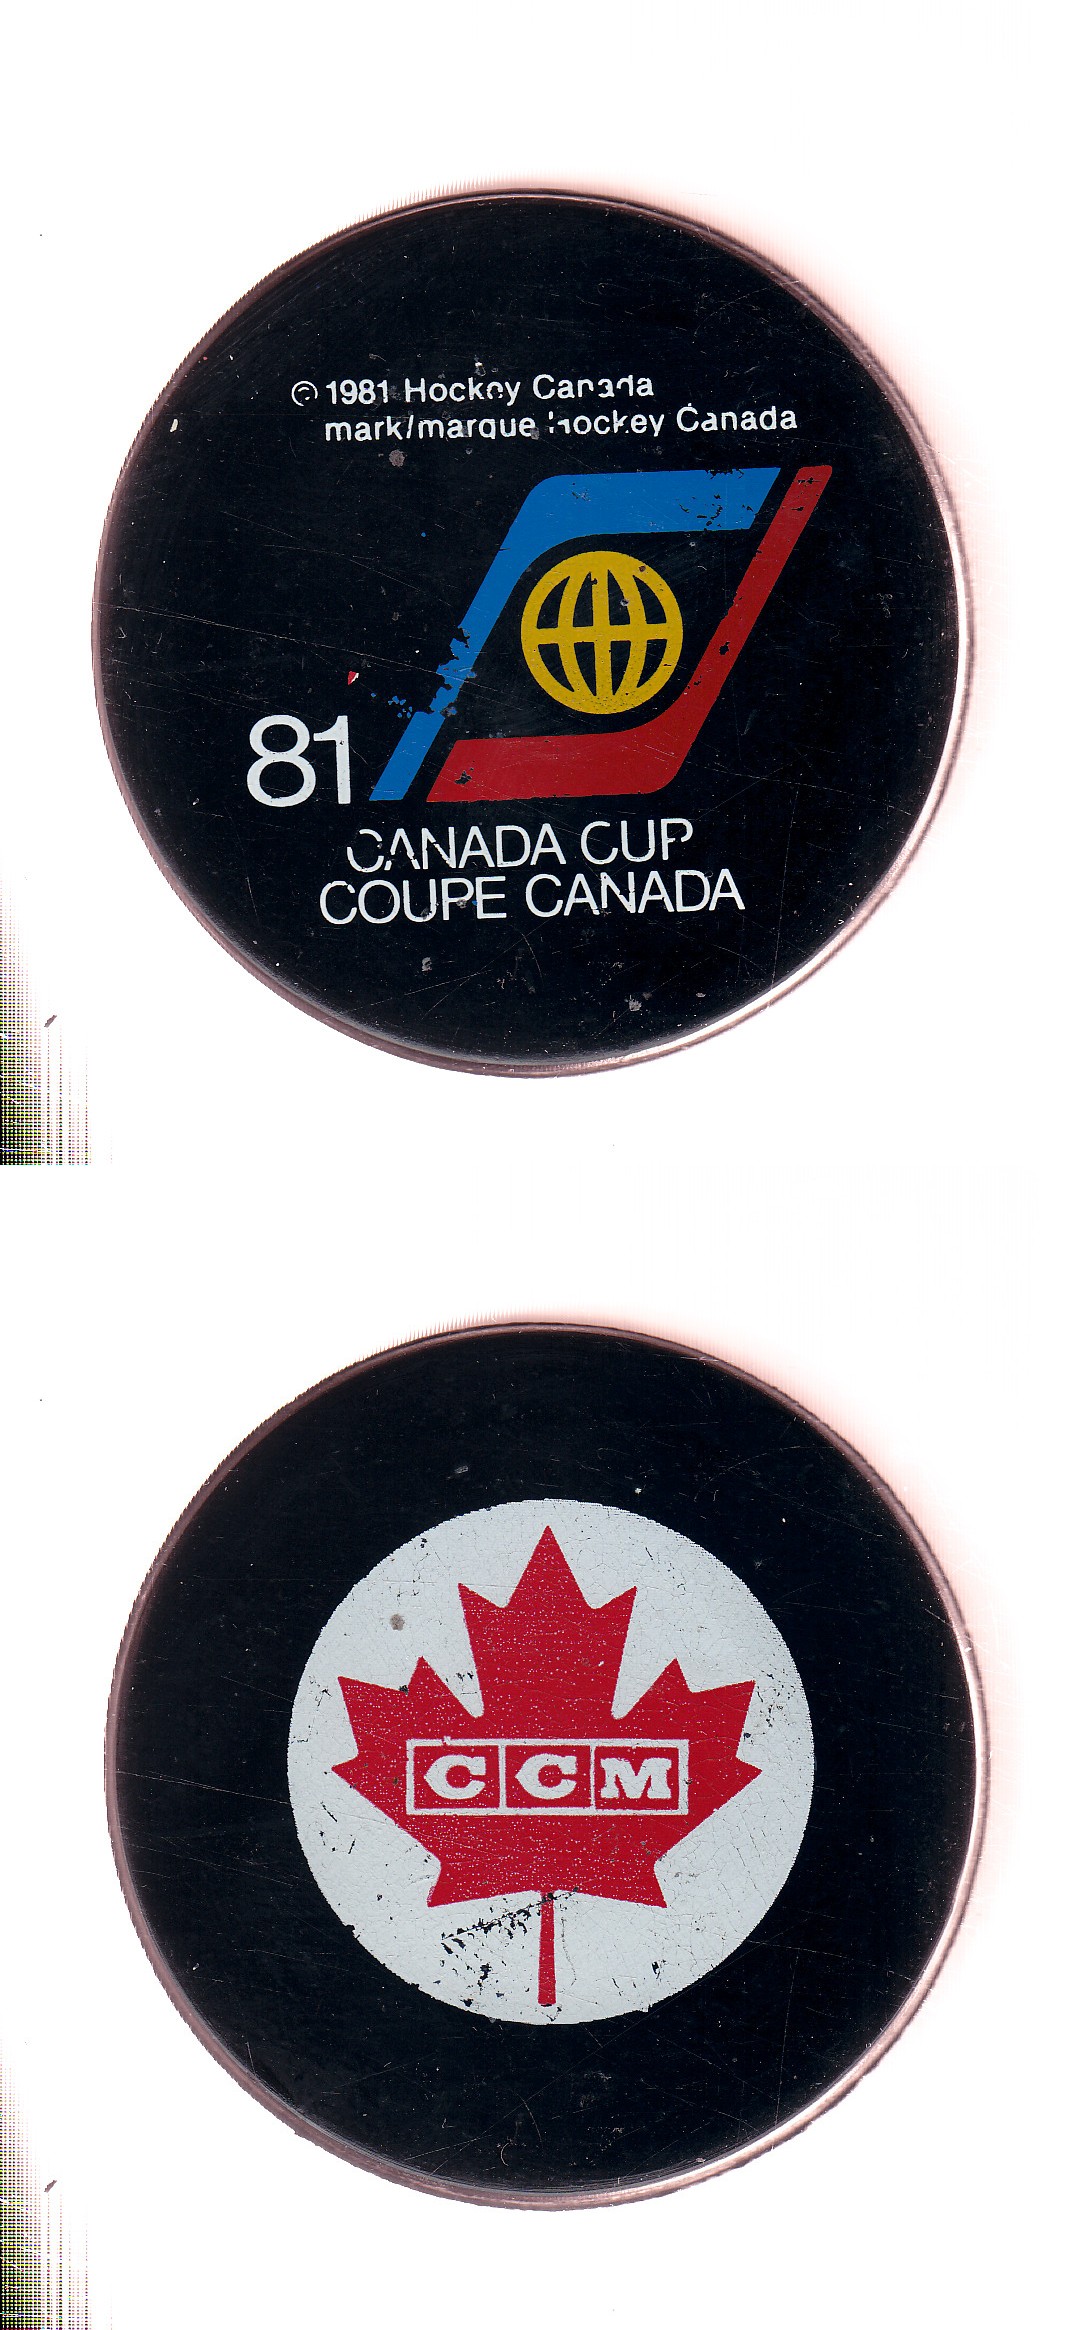 1981 VICEROY CANADA CUP SERIES GAME PUCK photo